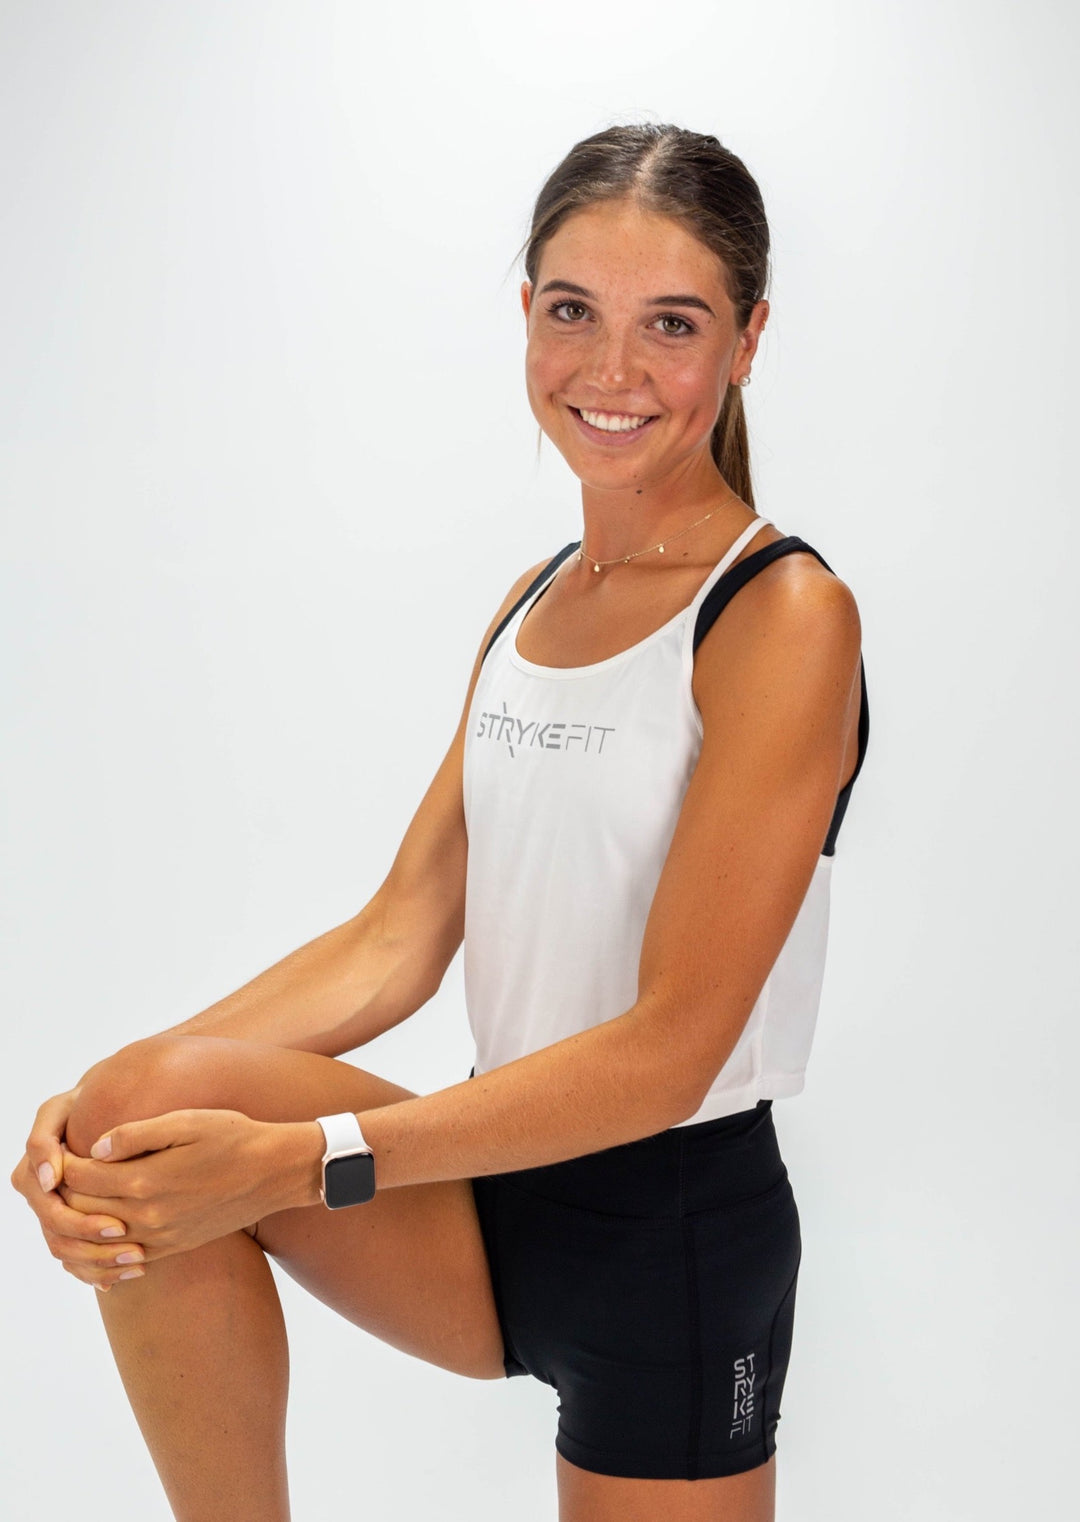 The TEMPO RUNNING SINGLET is a cropped style featuring a racerback strap design that allows your arms to move naturally through every stride. This singlet is made from lightweight, breathable, and moisture-wicking that allowing you to perform at your highest potential. Lightweight, quick-dry, and breathable fabric, Moisture-wicking technology, Reflective logo to enhance visibility in low light and a Crop length are some of the features.